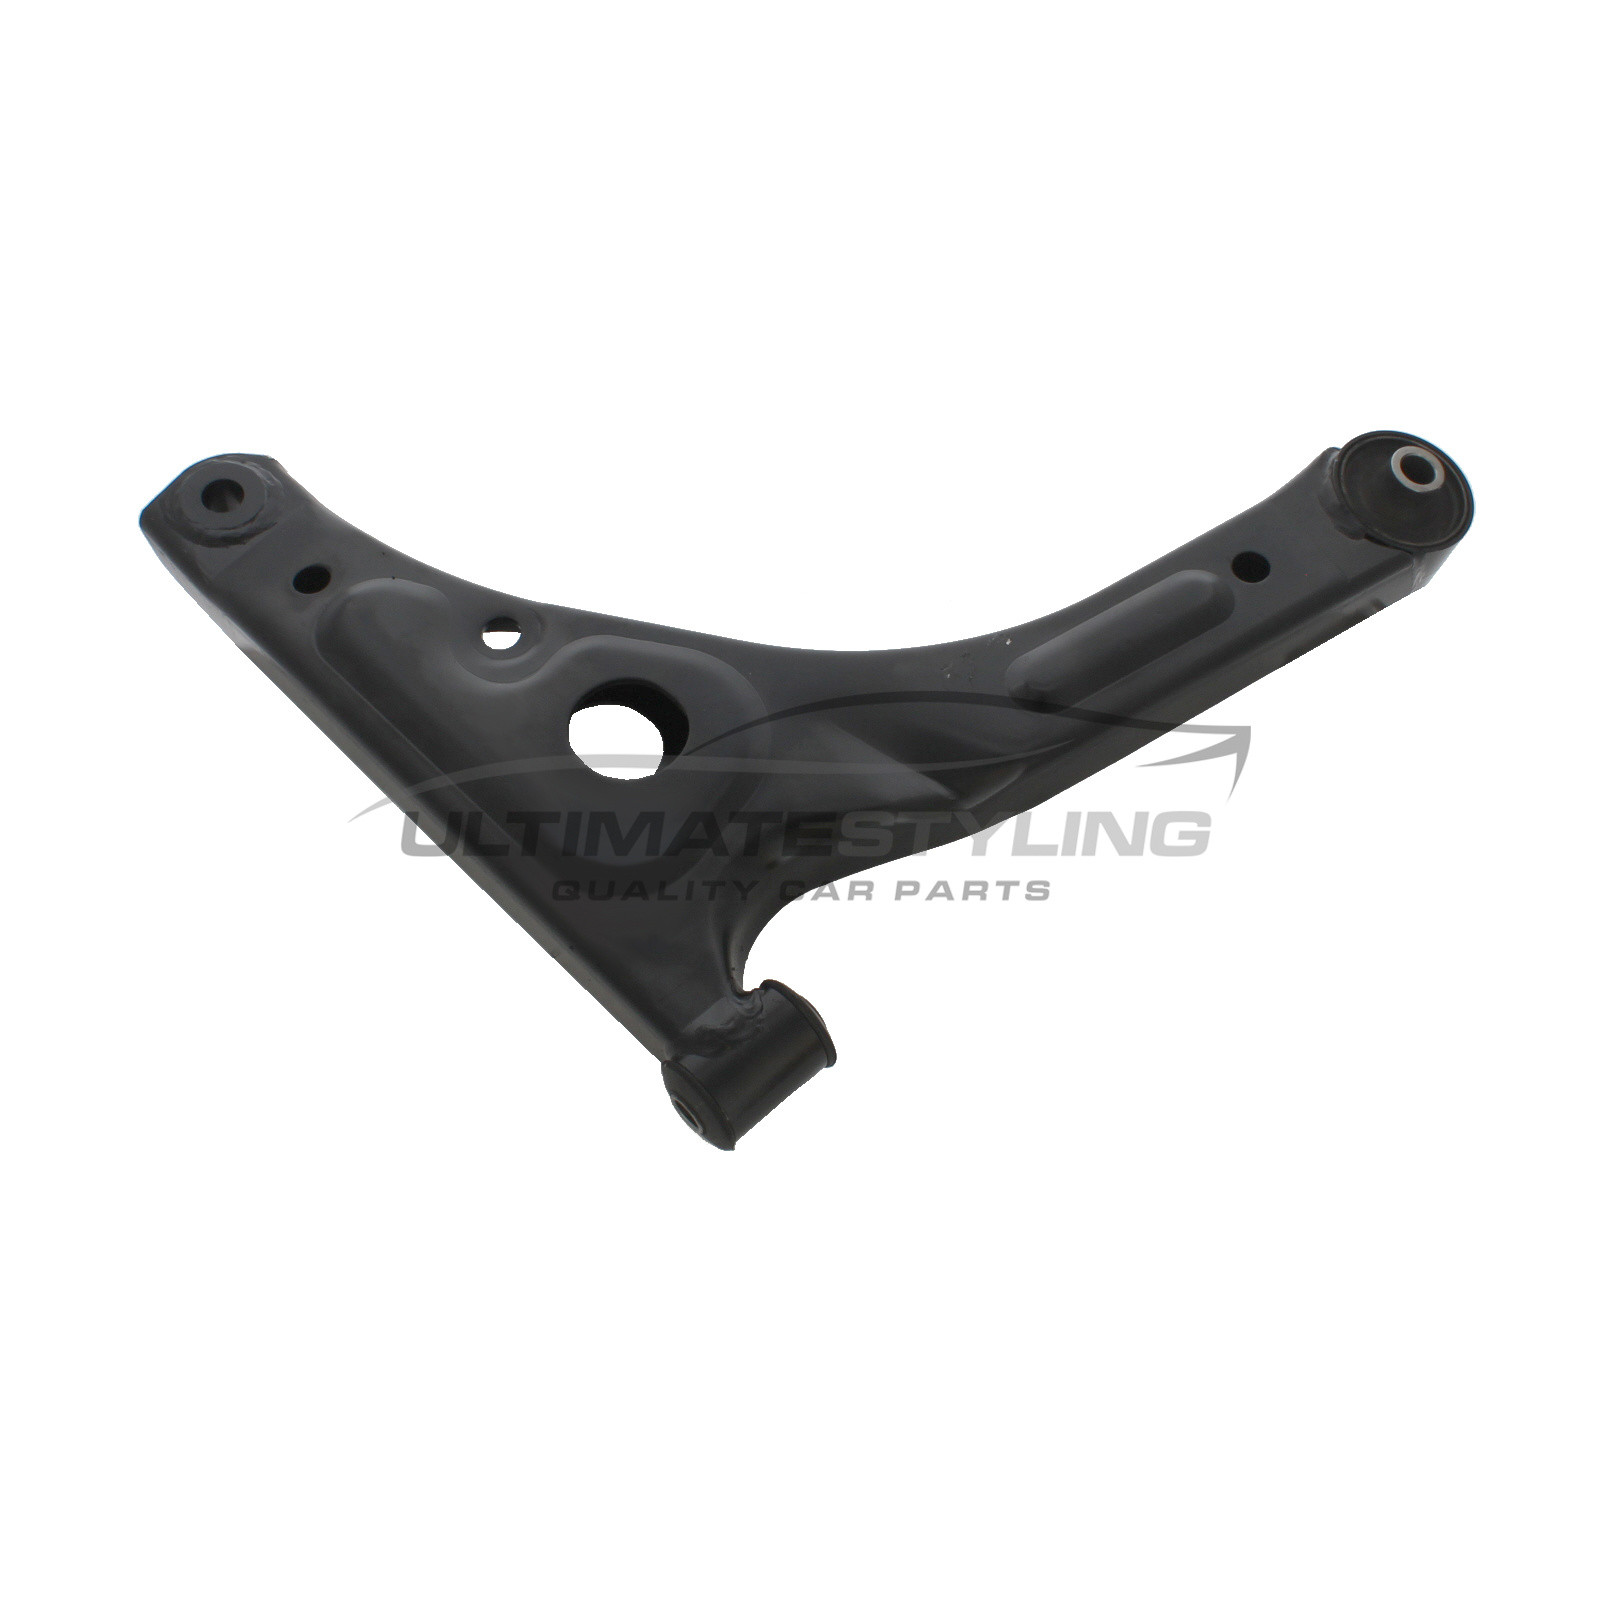 Ford Transit 2000-2014 Front Lower Suspension Arm (Steel) Excluding Ball Joint and Rear Bush Driver Side (RH)